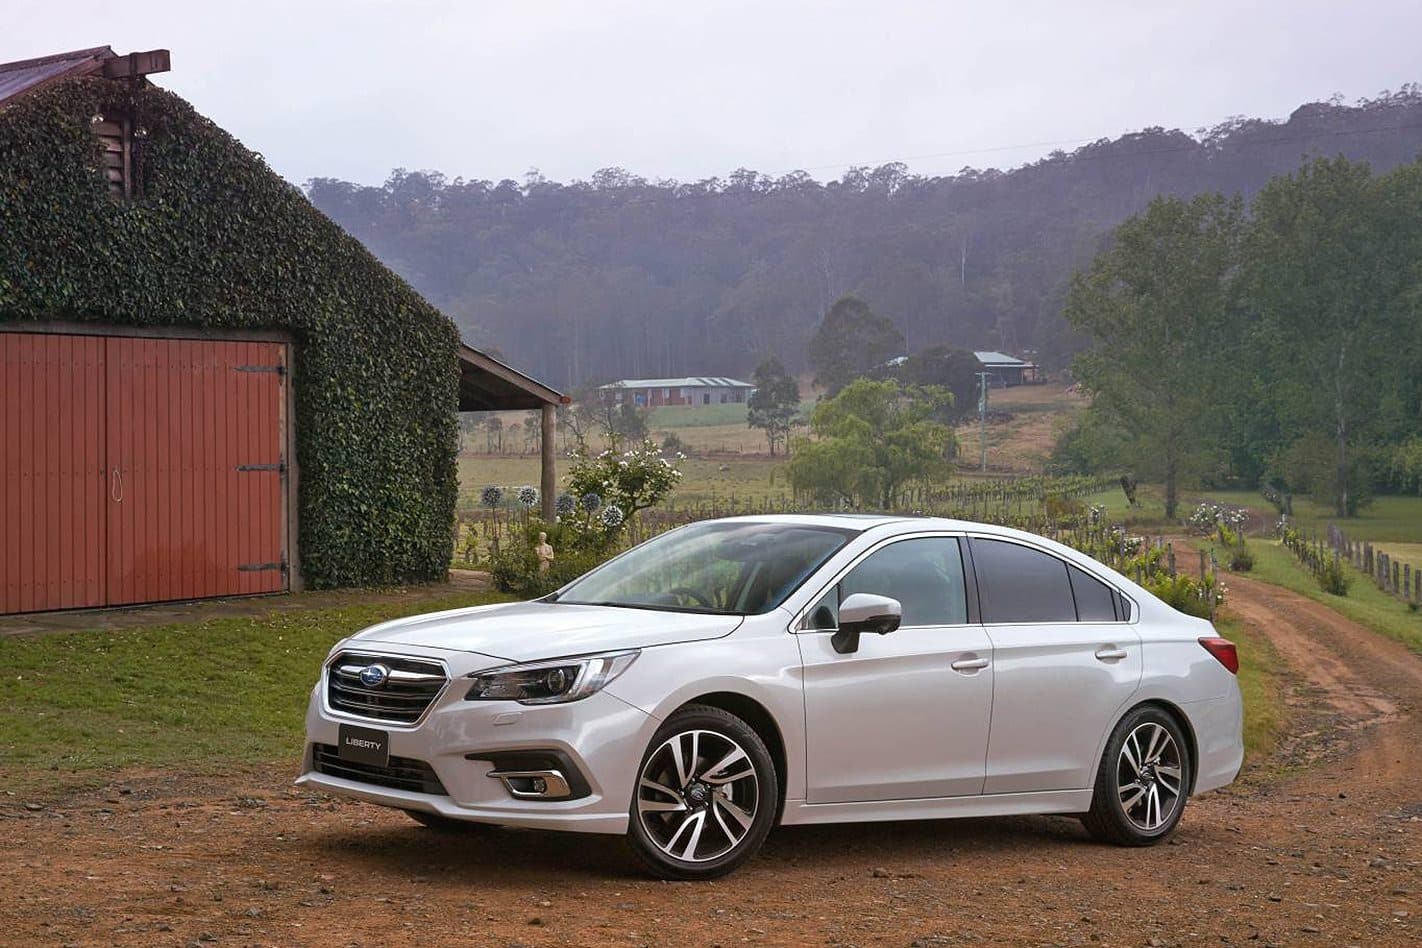 The Subaru Liberty: The Perfect Combination of Style and Performance